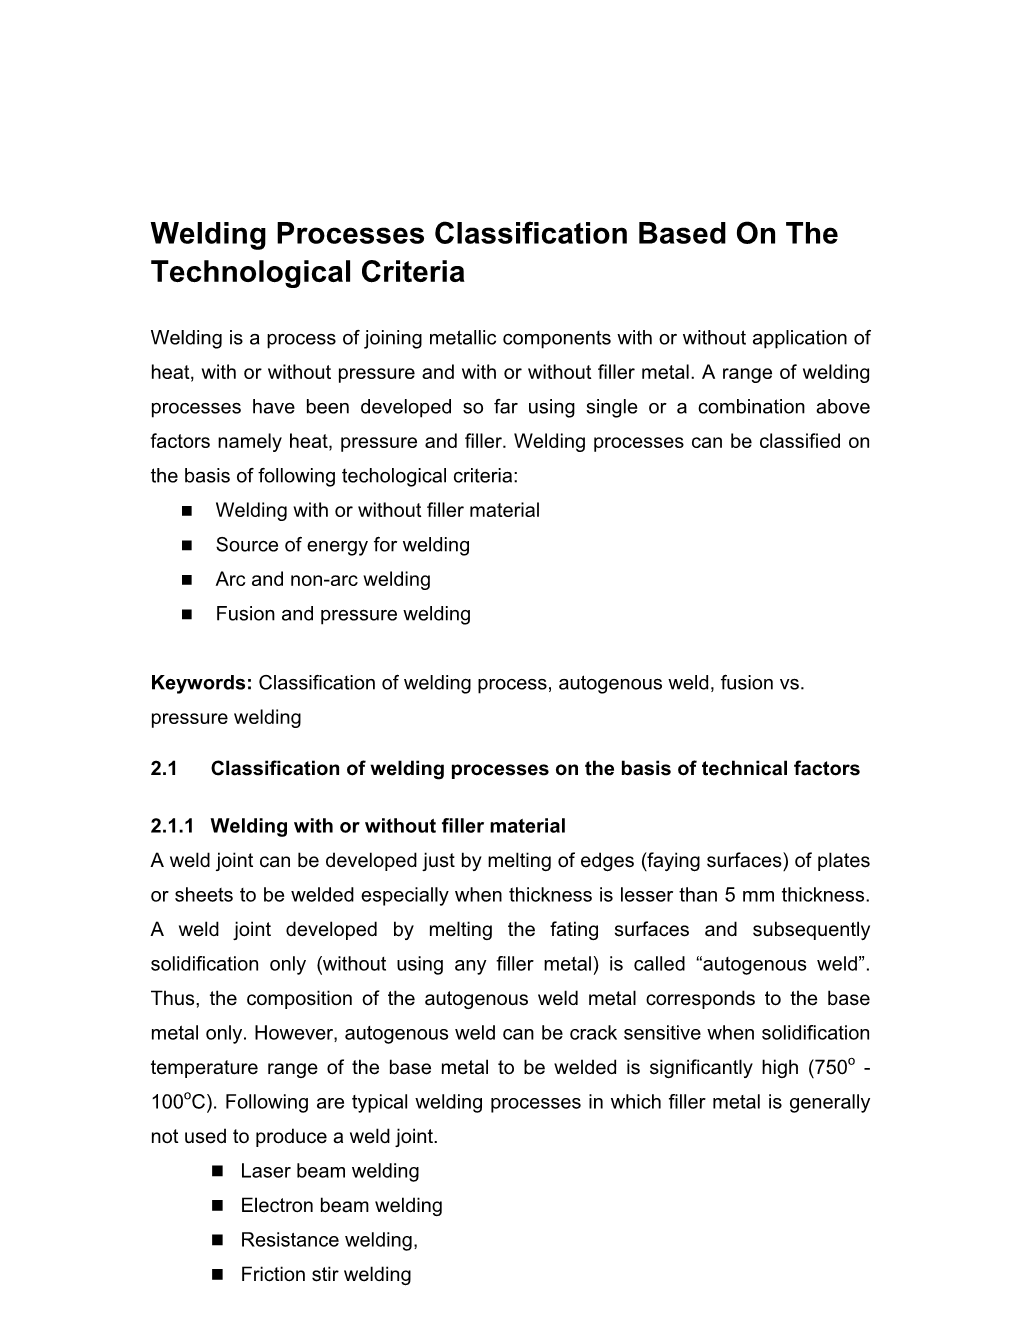 Welding Processes Classification Based on the Technological Criteria